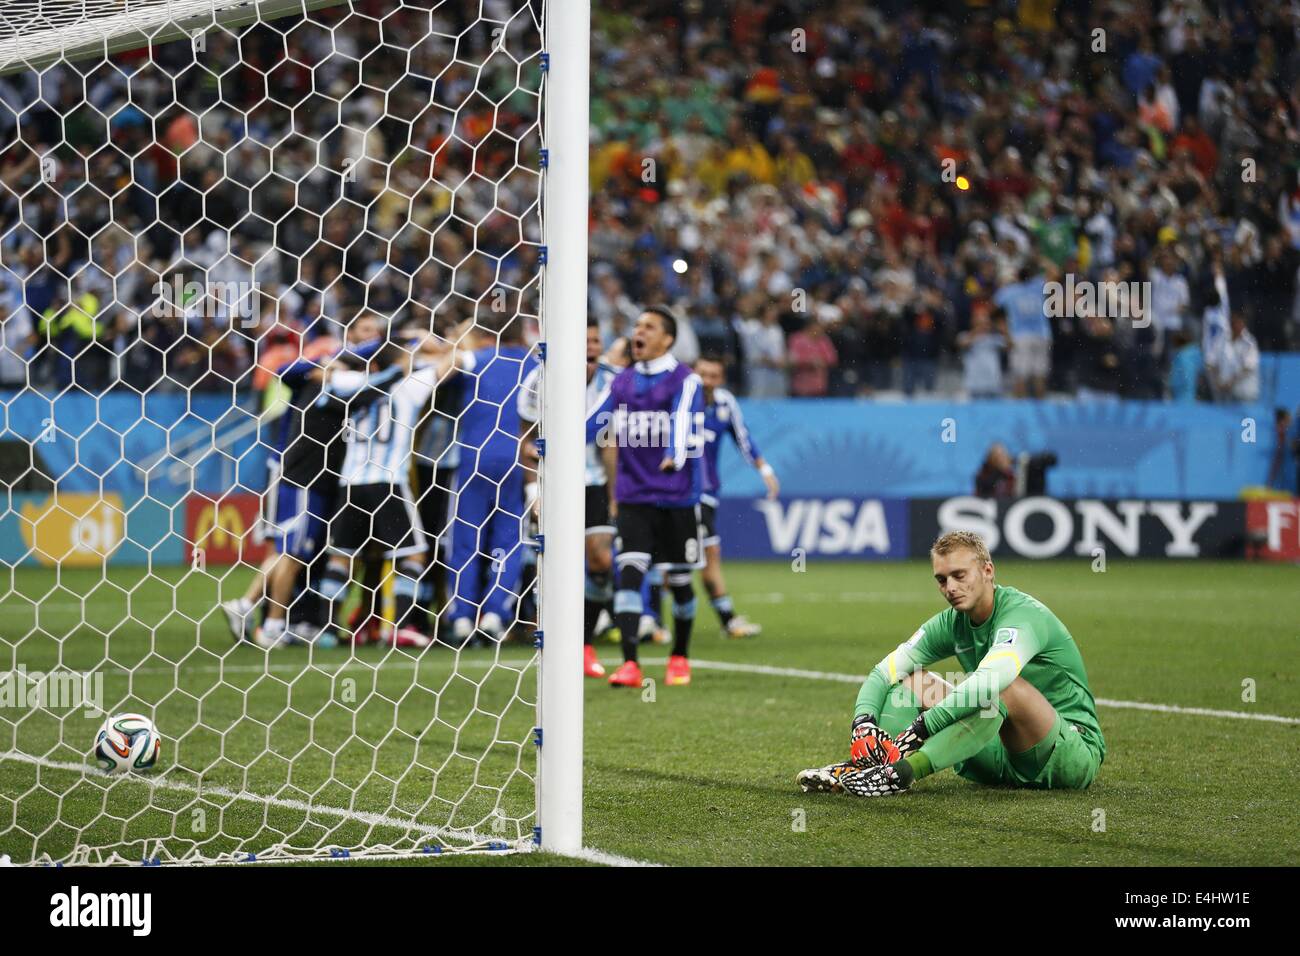 Jasper Cillessen (NED), JULY 9, 2014 - Football / Soccer : Jasper Cillesen of Netherlands looks dejected after losing the penalty shoot out during the FIFA World Cup 2014 semi-final match between Netherlands 0(2-4)0 Argentina at Arena De Sao Paulo Stadium in Sao Paulo, Brazil. (Photo by AFLO) [3604] Stock Photo